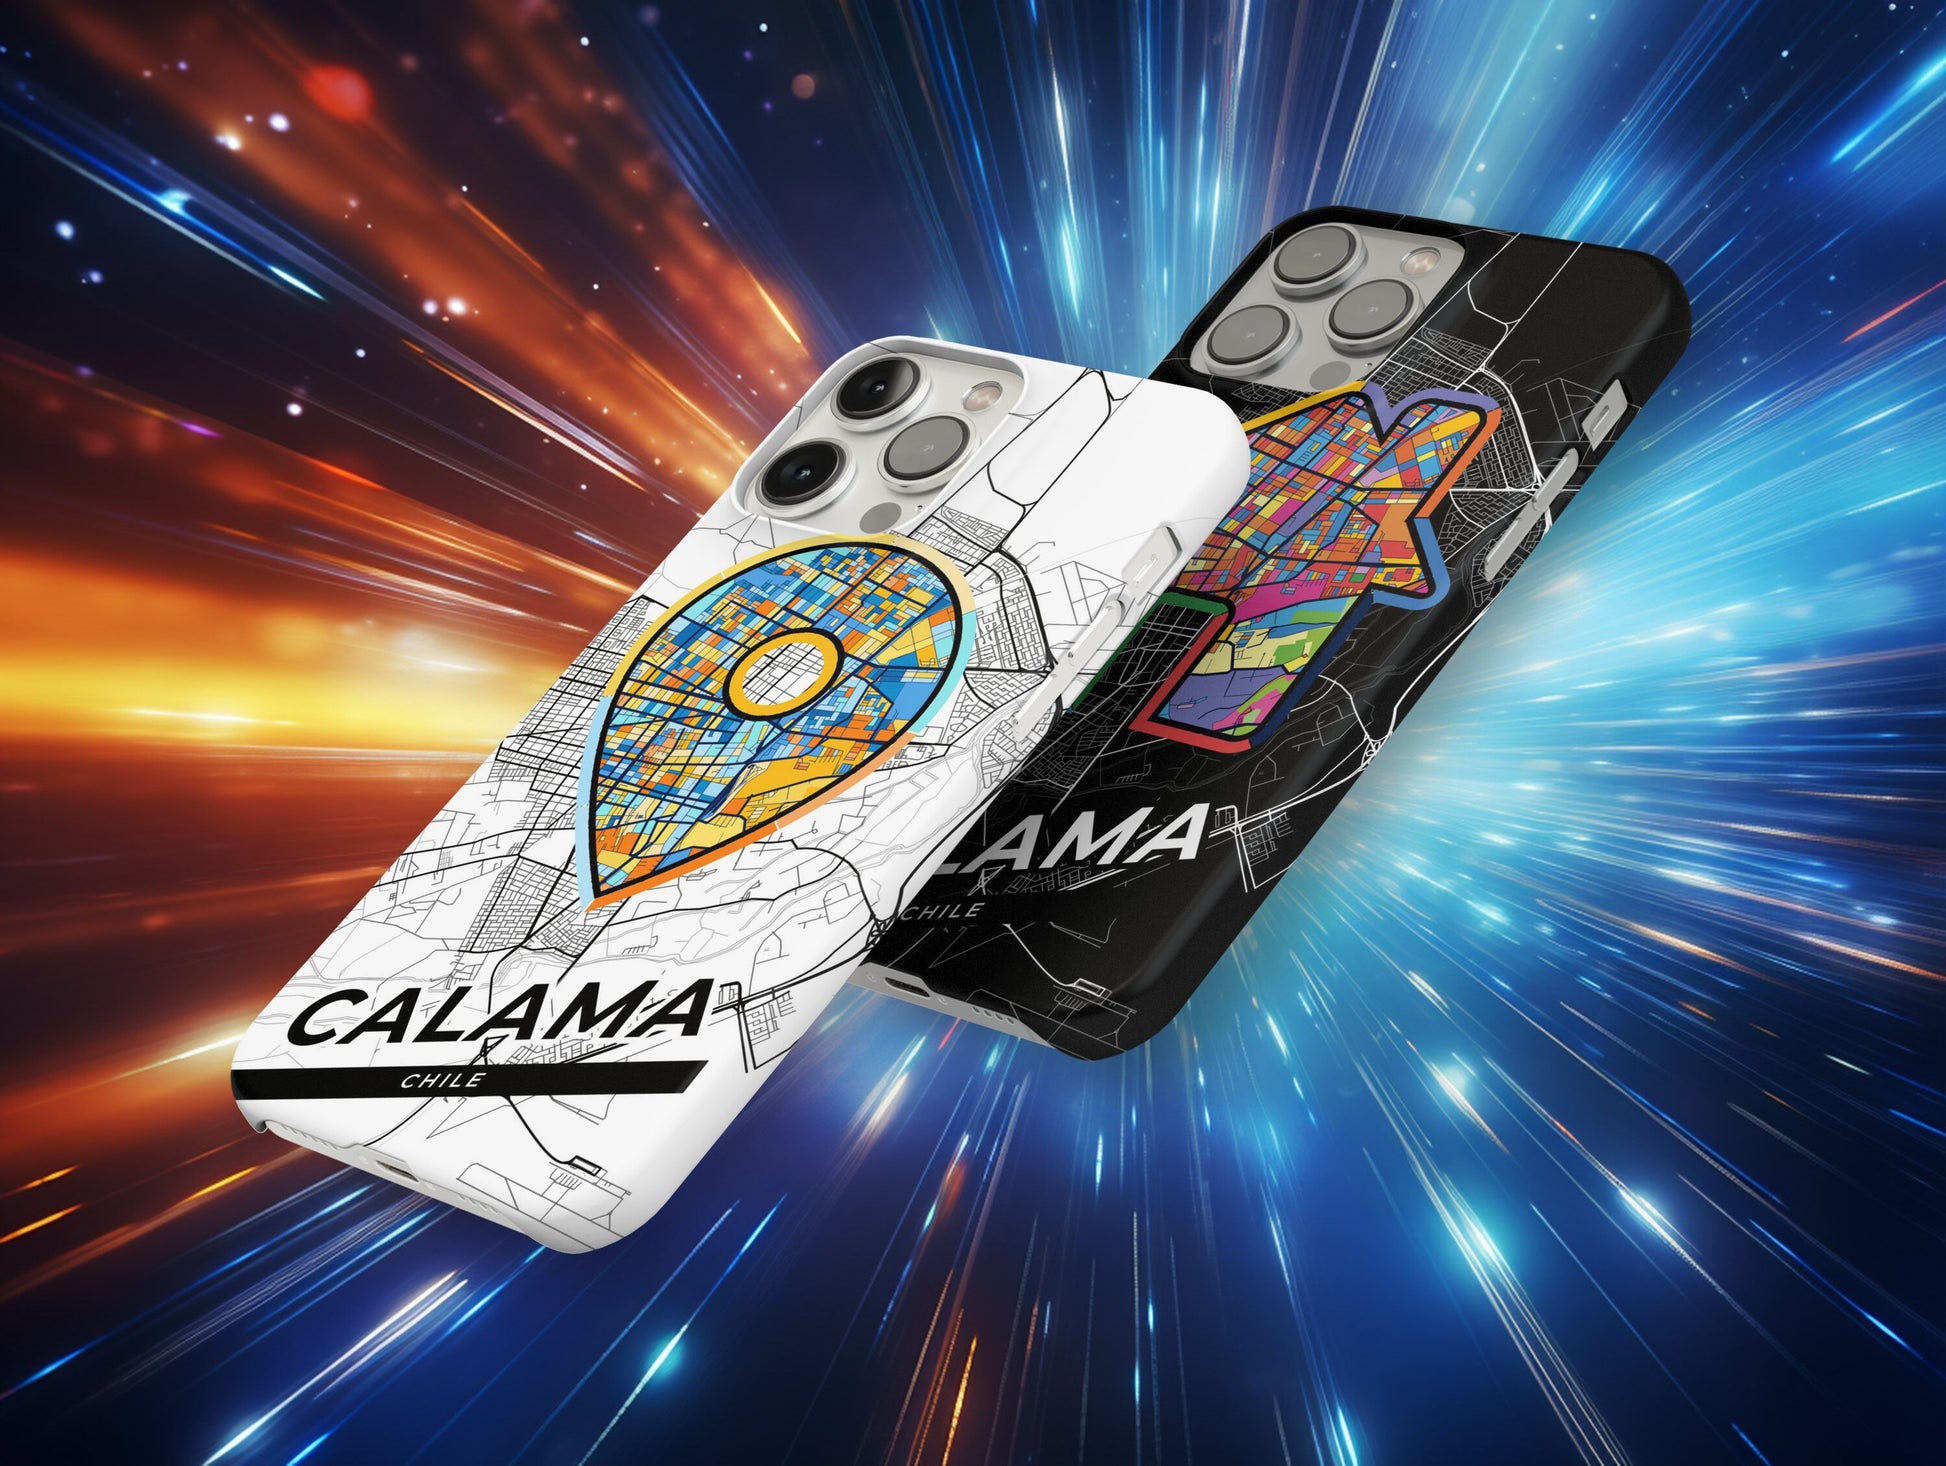 Calama Chile slim phone case with colorful icon. Birthday, wedding or housewarming gift. Couple match cases.